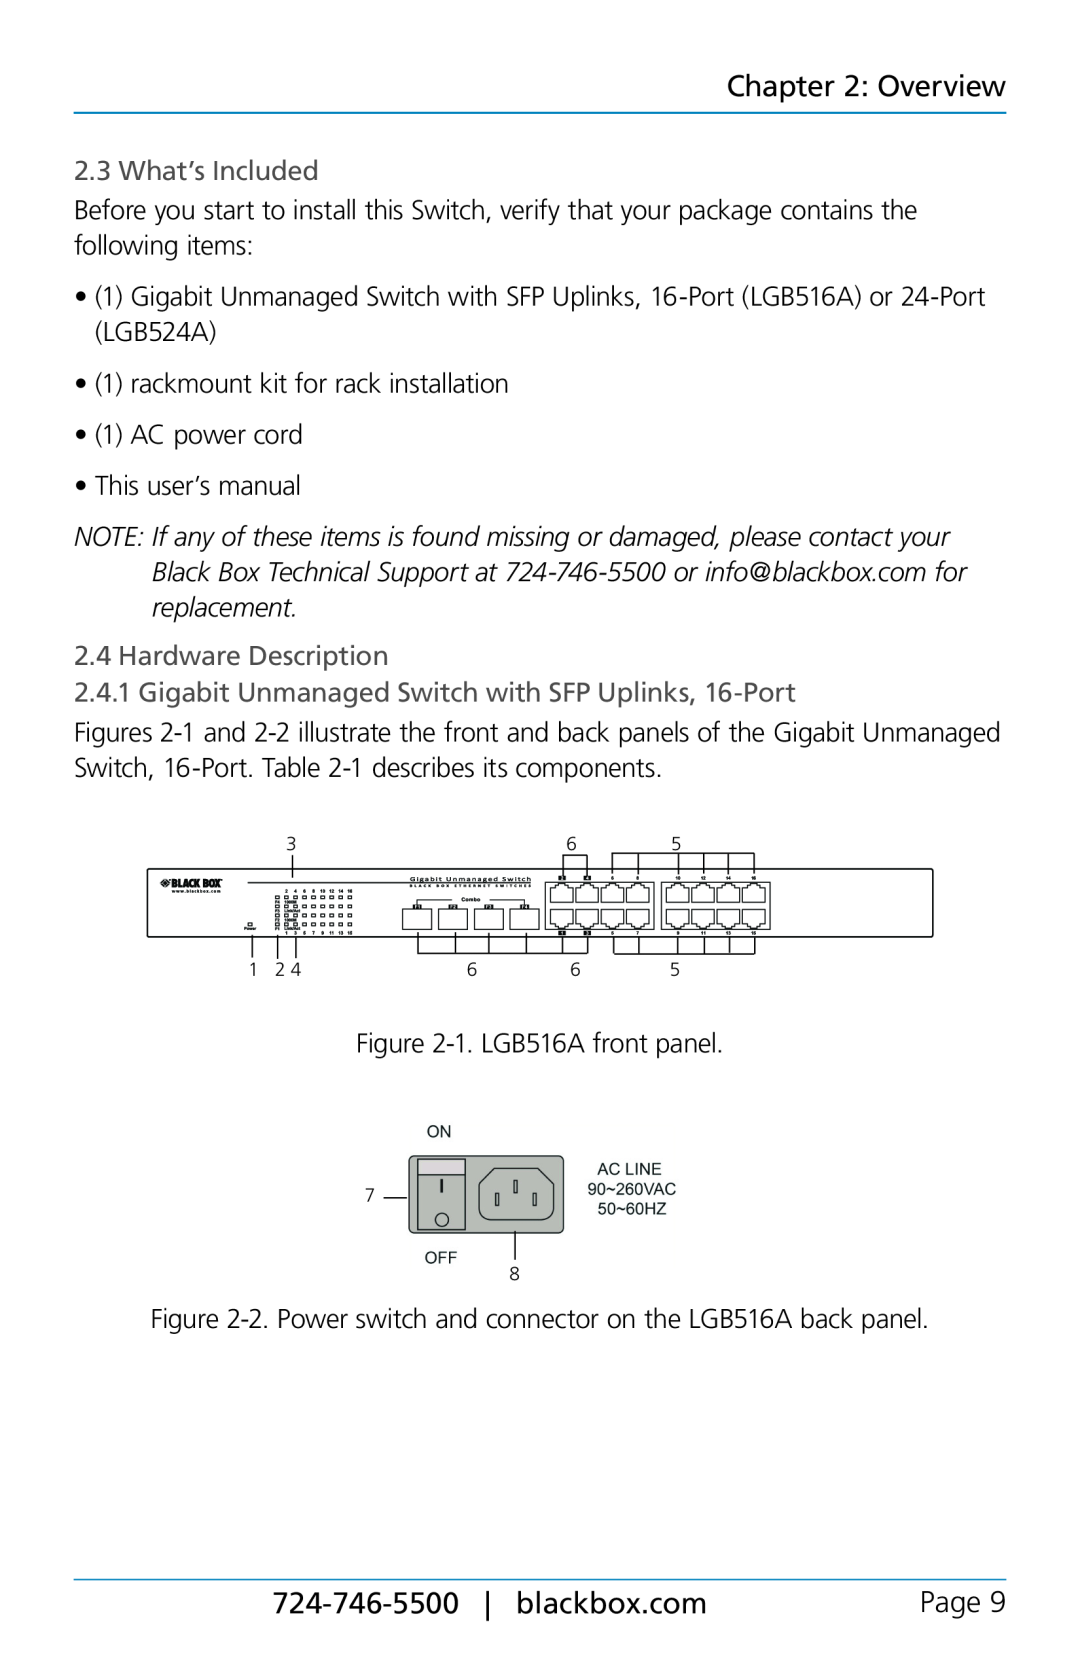 Black Box lgb524a, lgb516a, solid gigabit switching in a rackmount chassis Overview, What’s Included, Hardware Description 